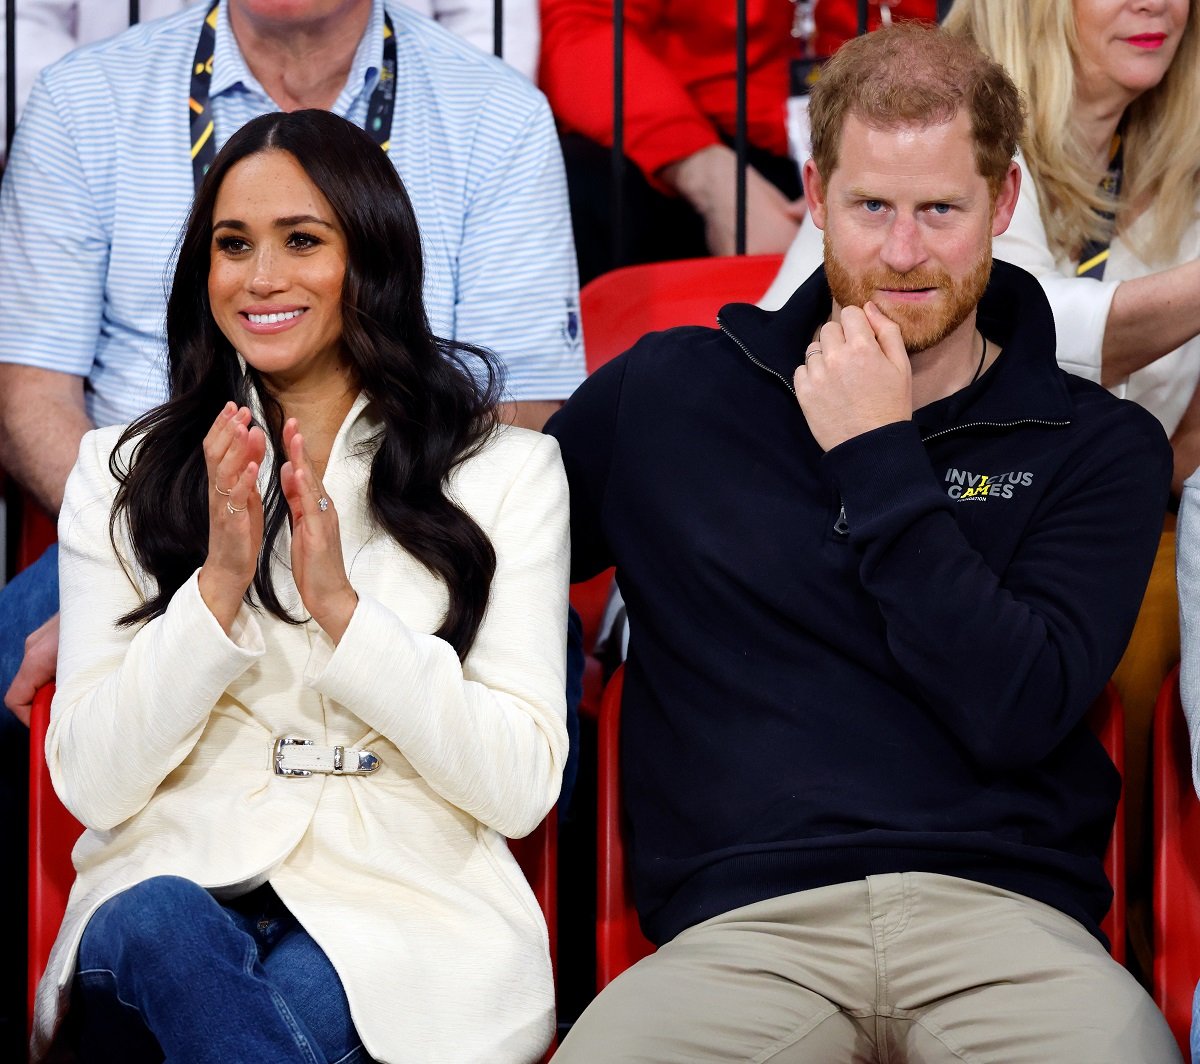 Prince Harry and Meghan Markle watch the sitting volley ball competition at the Invictus Games